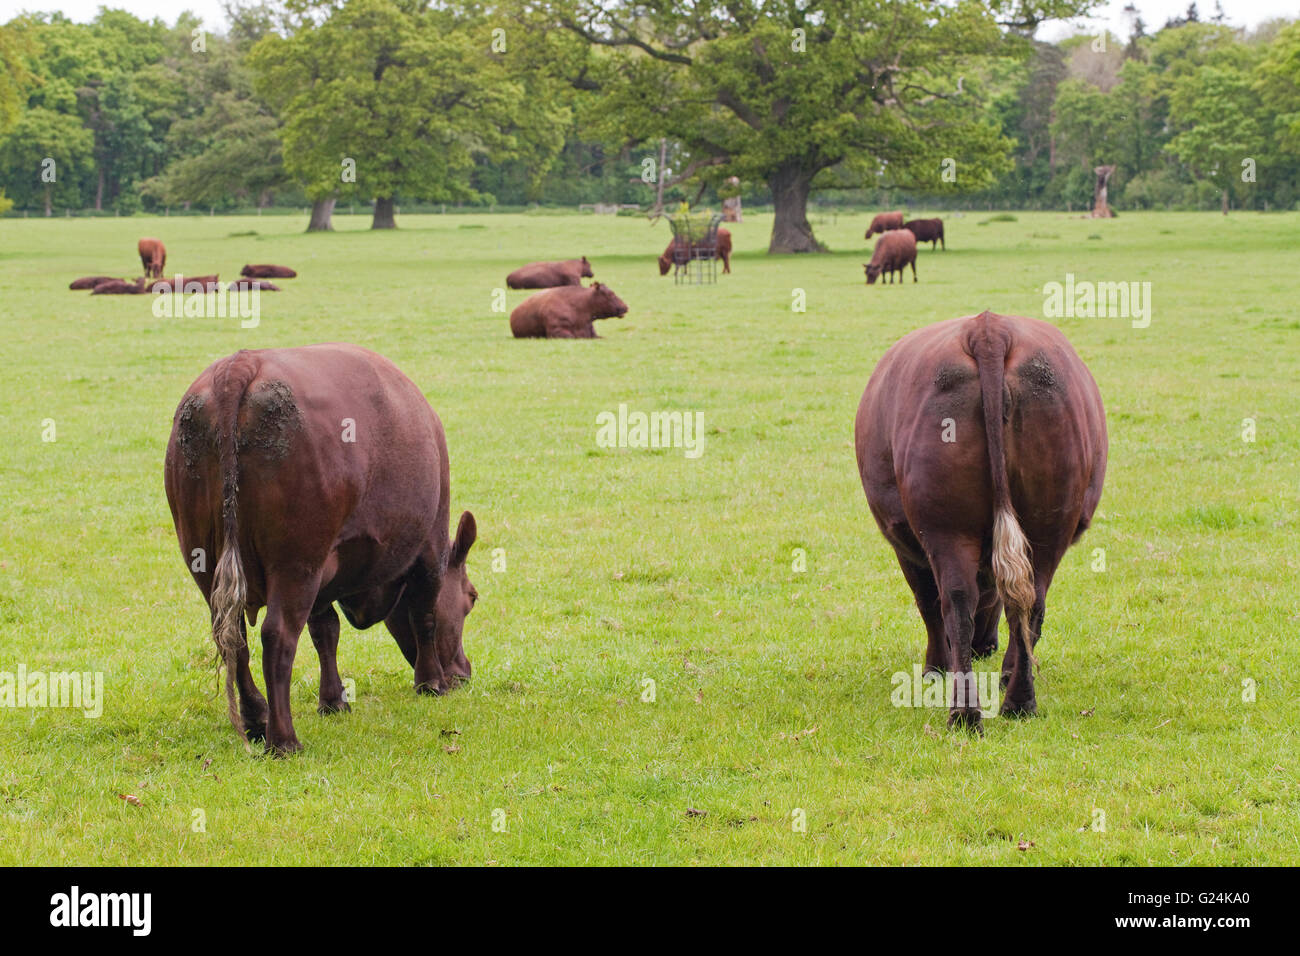 Sussex Cow (Bos primigenius). Rear view showing typically white tipped tail switch ends of this breed.  Beef rare breed. Stock Photo